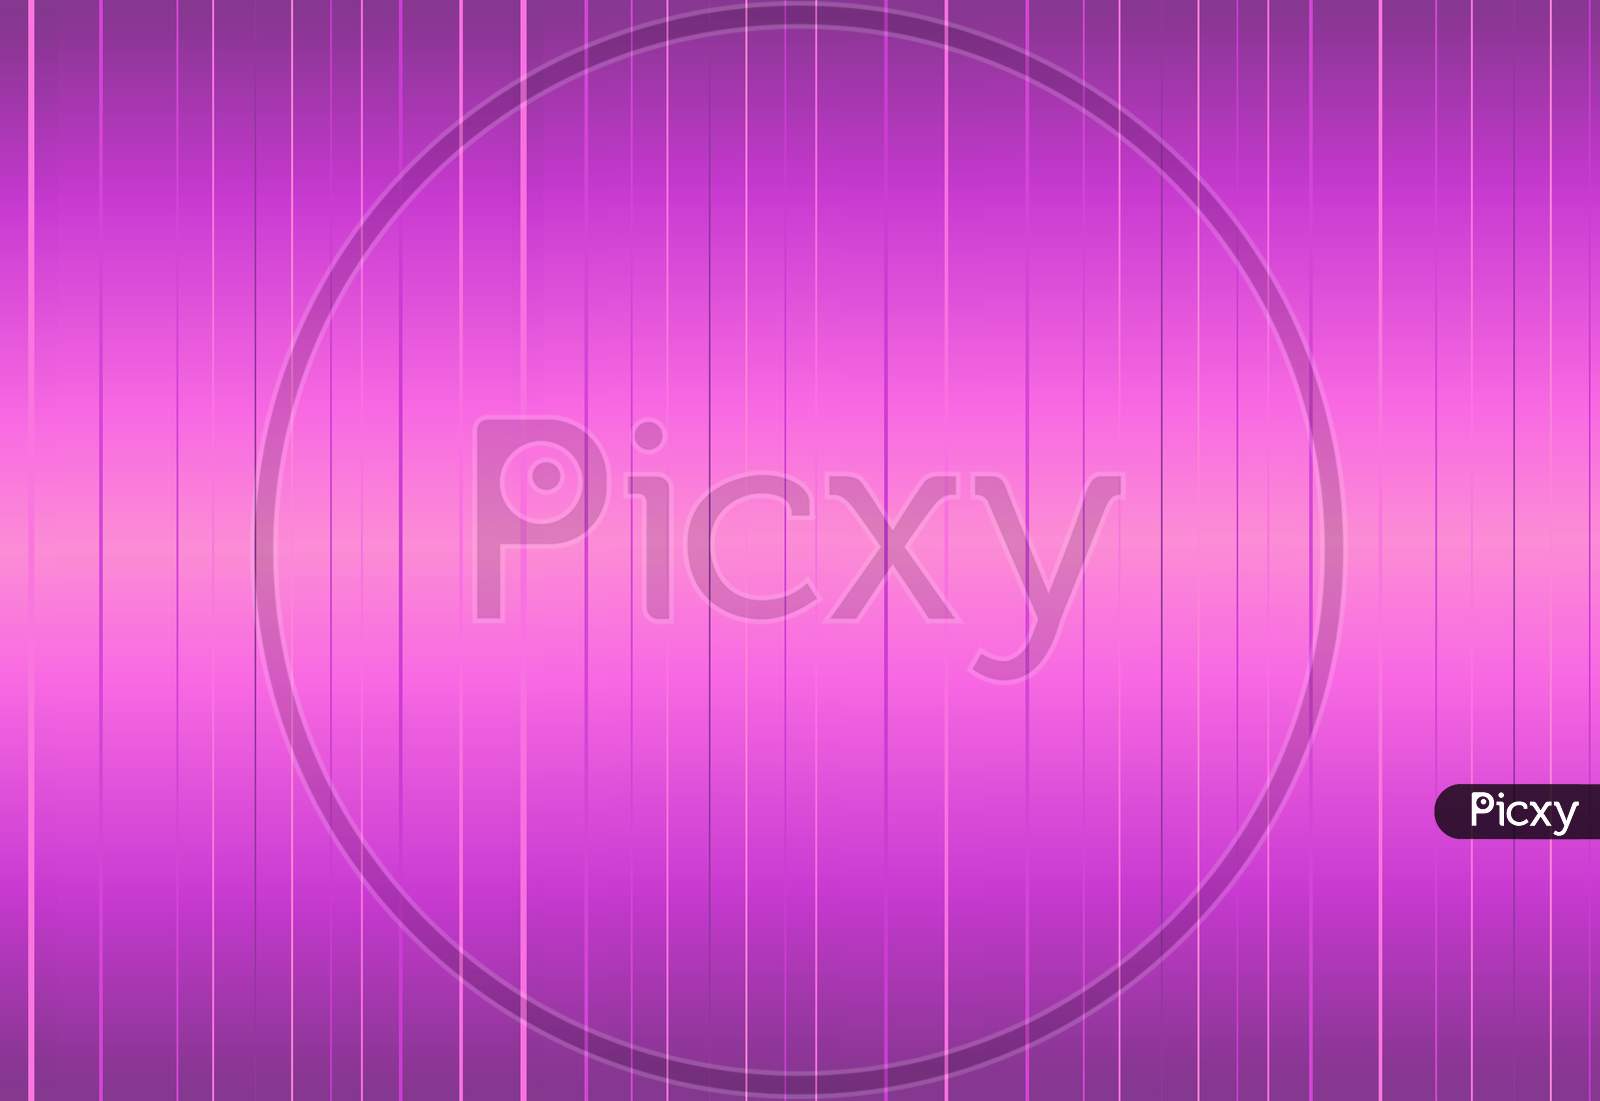 Trendy Abstract gradient Background with 3d Effect. Wave Texture with Pink, Purple Distorted Lines. Creative Optical Illusion. Futuristic Style. Abstract Background with vertical 3d Striped illusion.